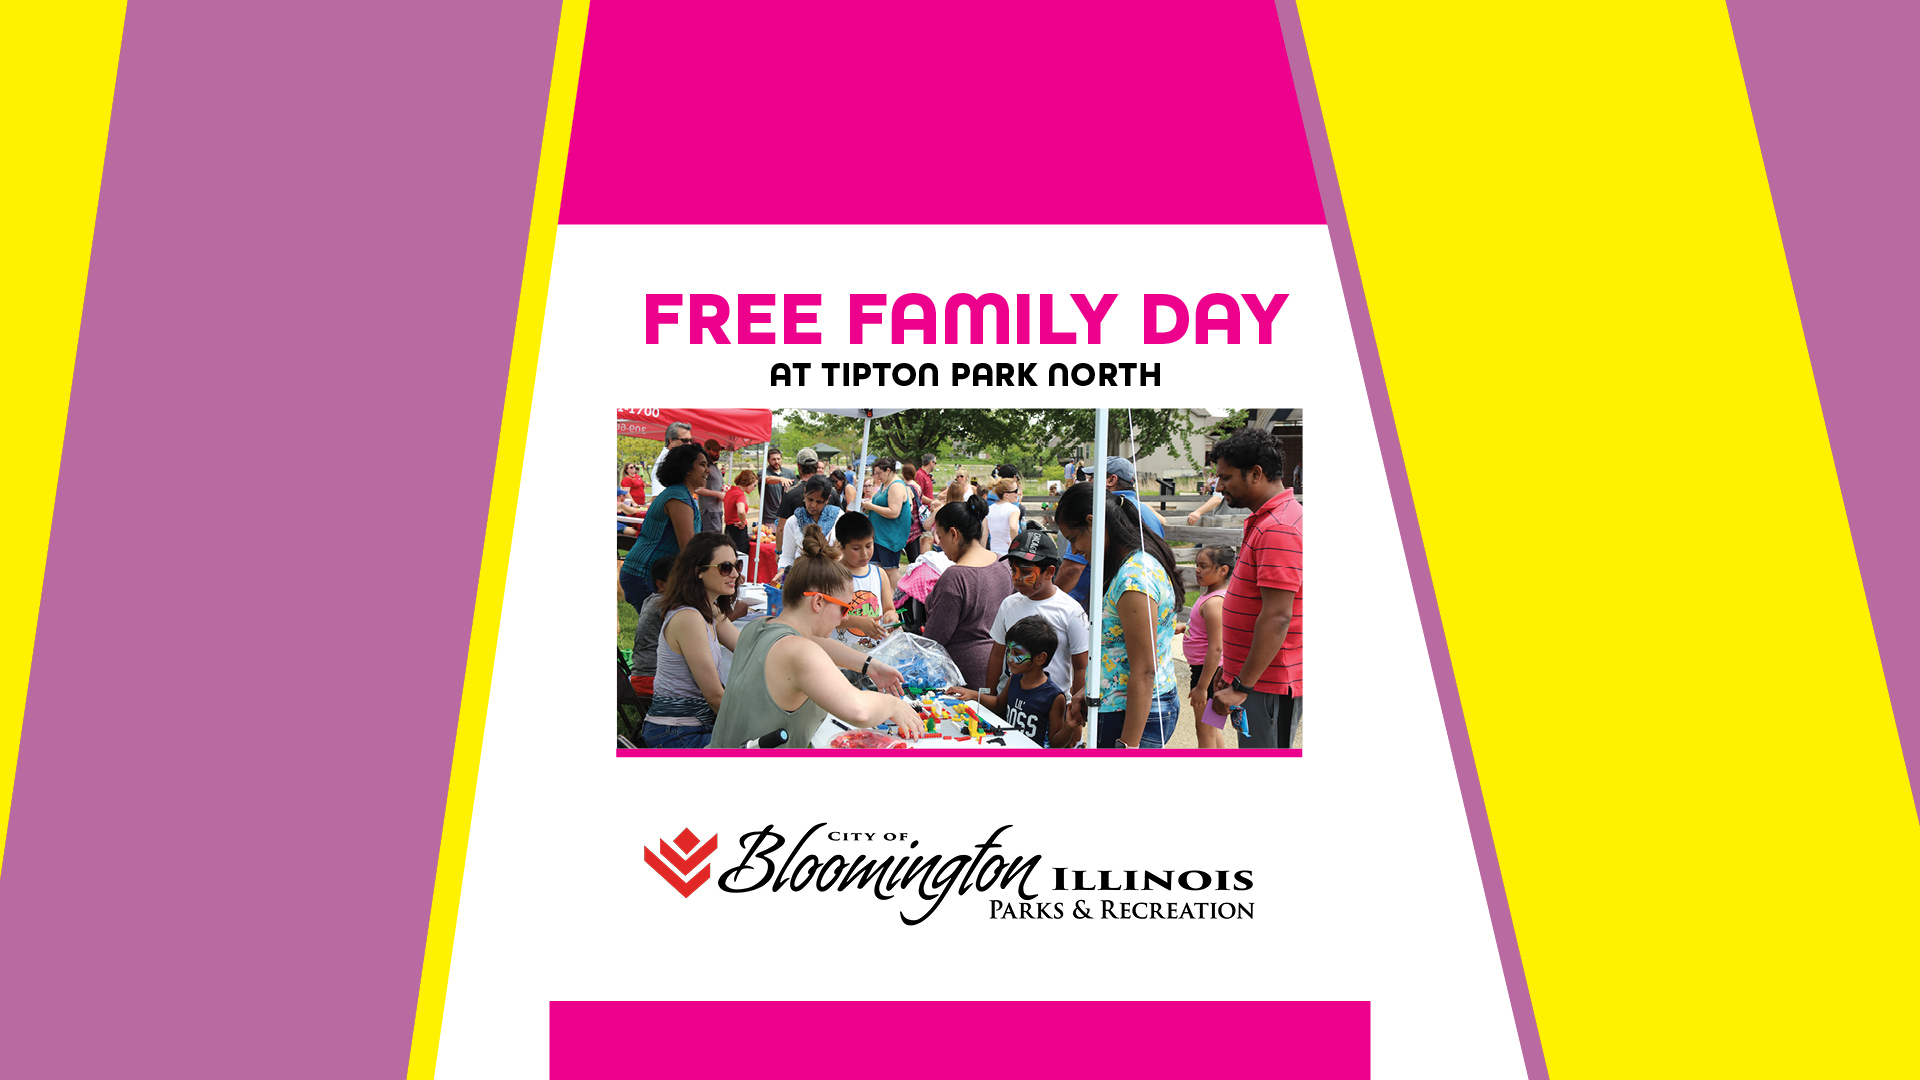 Free Family Day at Tipton Park North